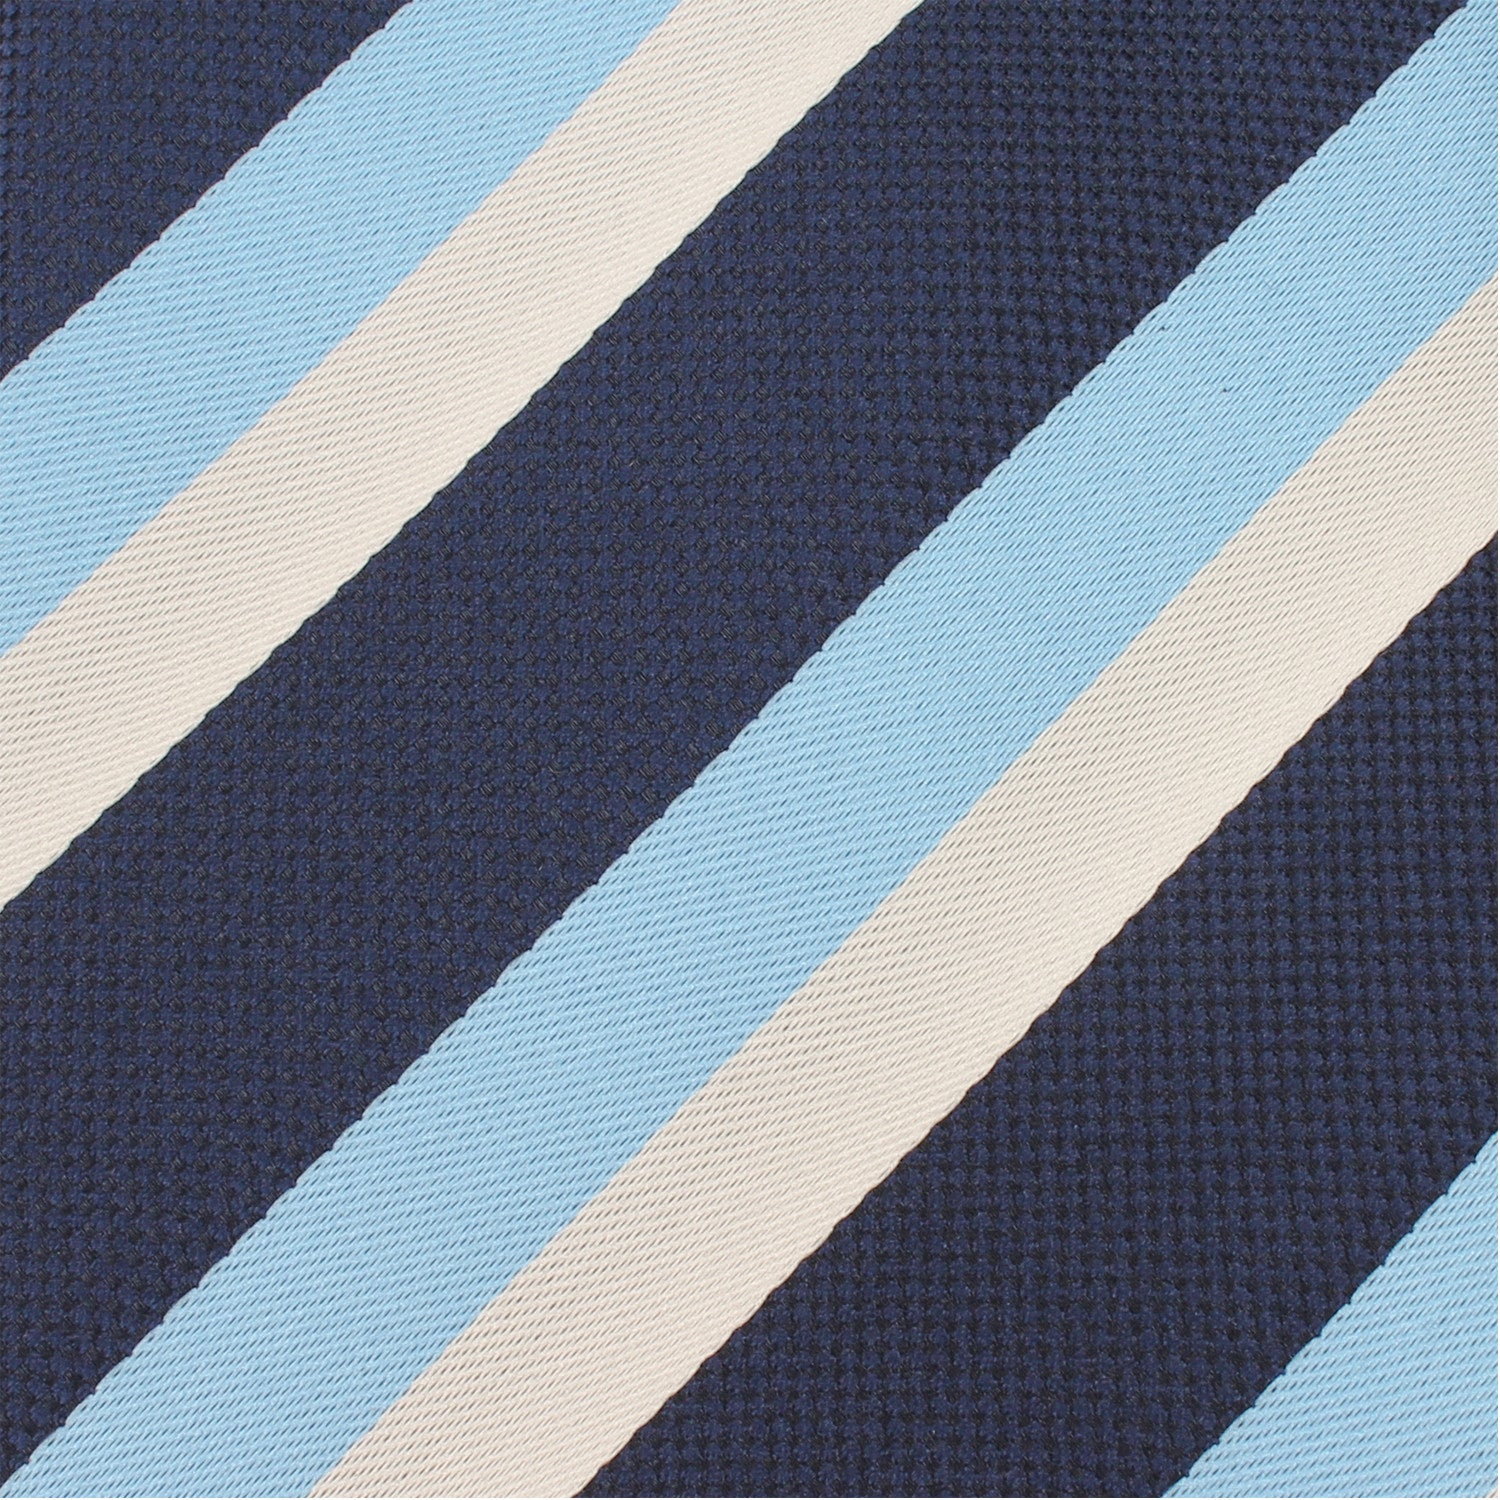 White Navy and Light Blue Striped Tie Fabric